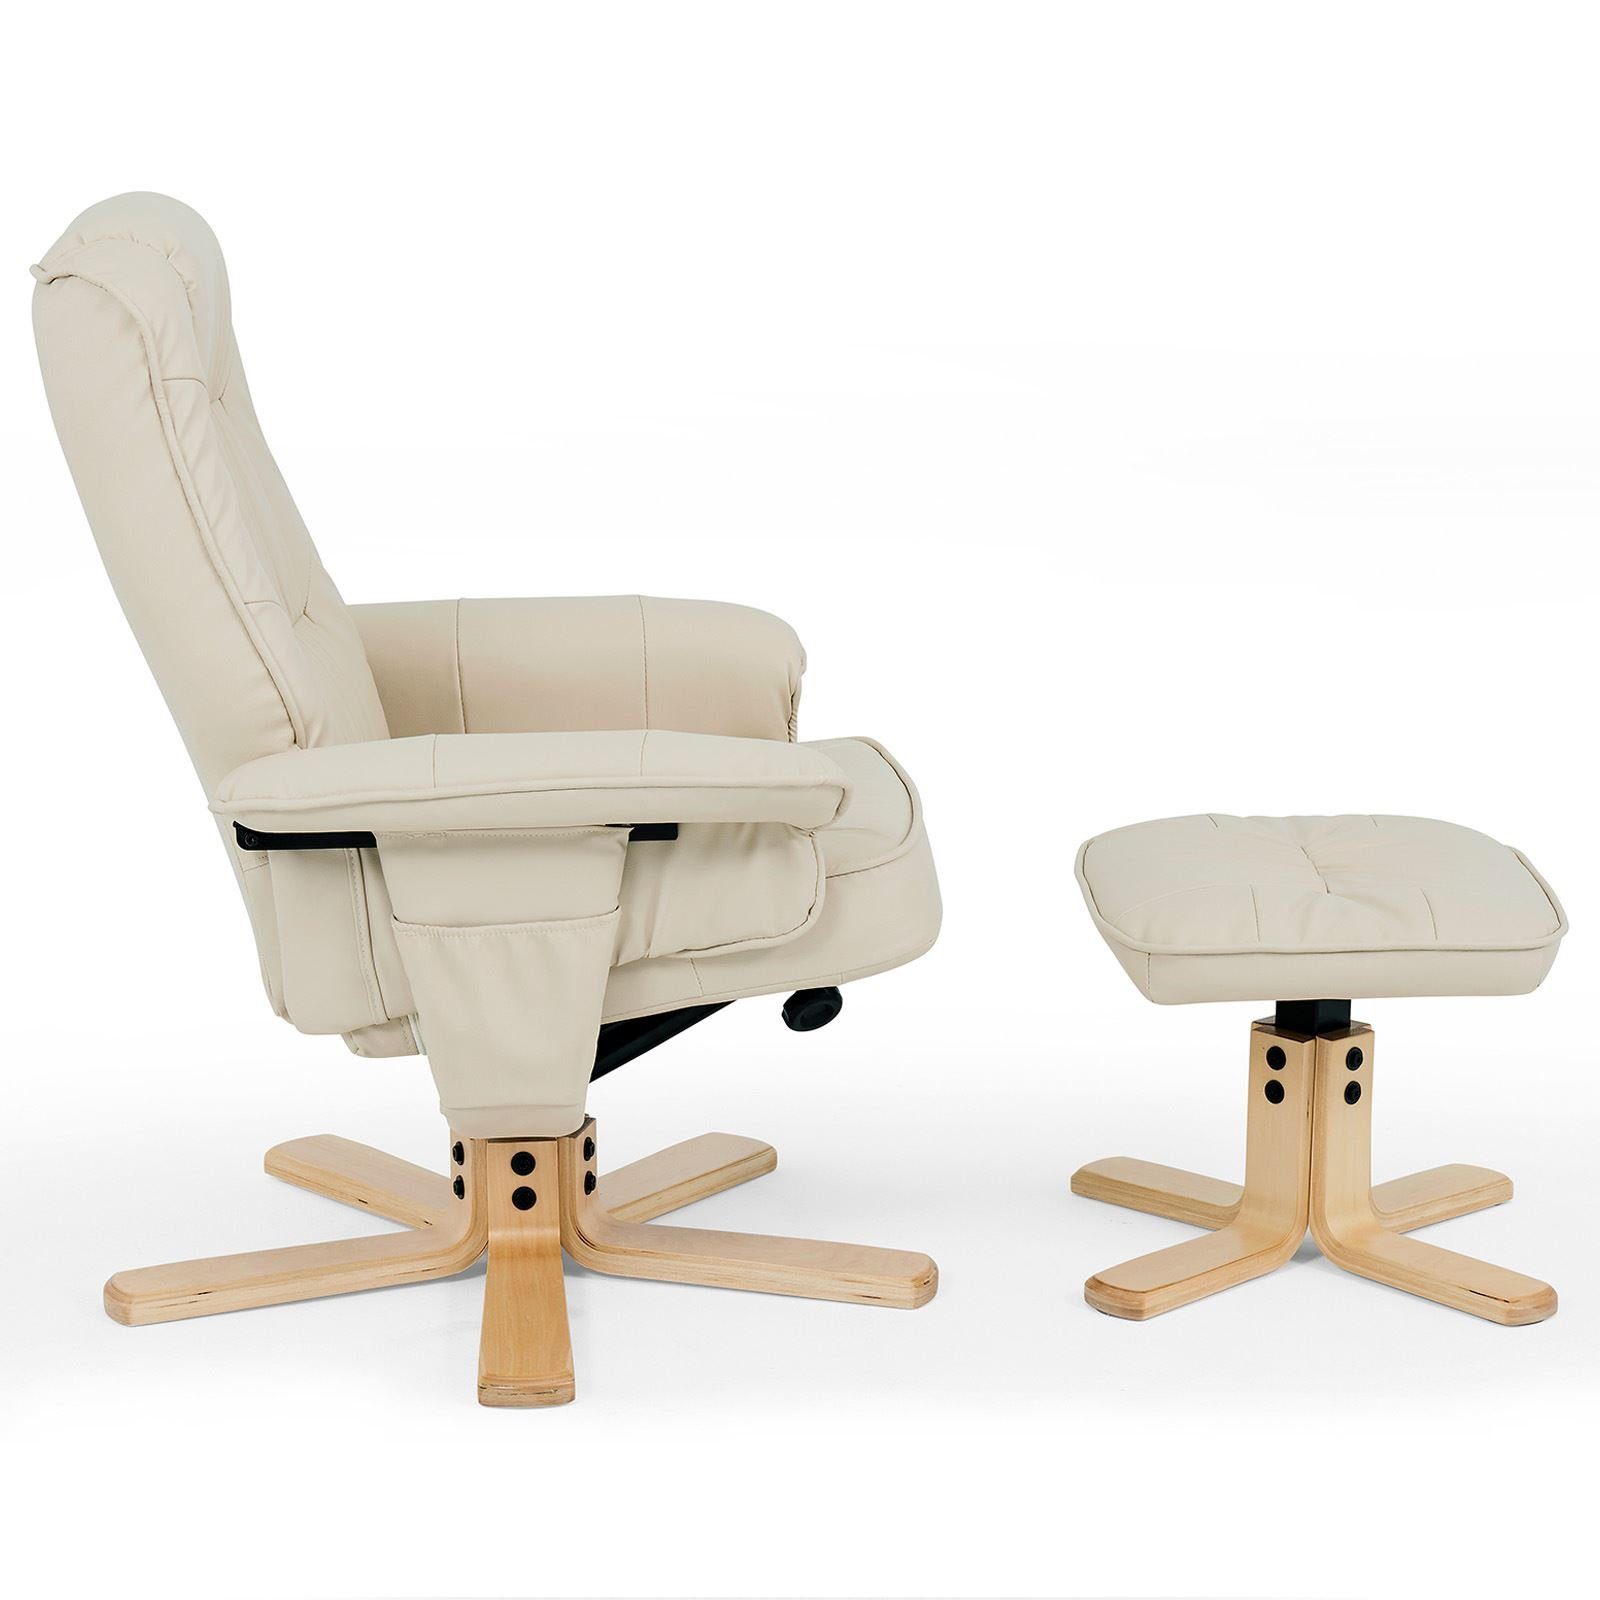 mit CHARLY, in beige Relaxsessel Drehsessel, IDIMEX Fernsehsessel, Polstersessel be Hocker, Relaxsessel